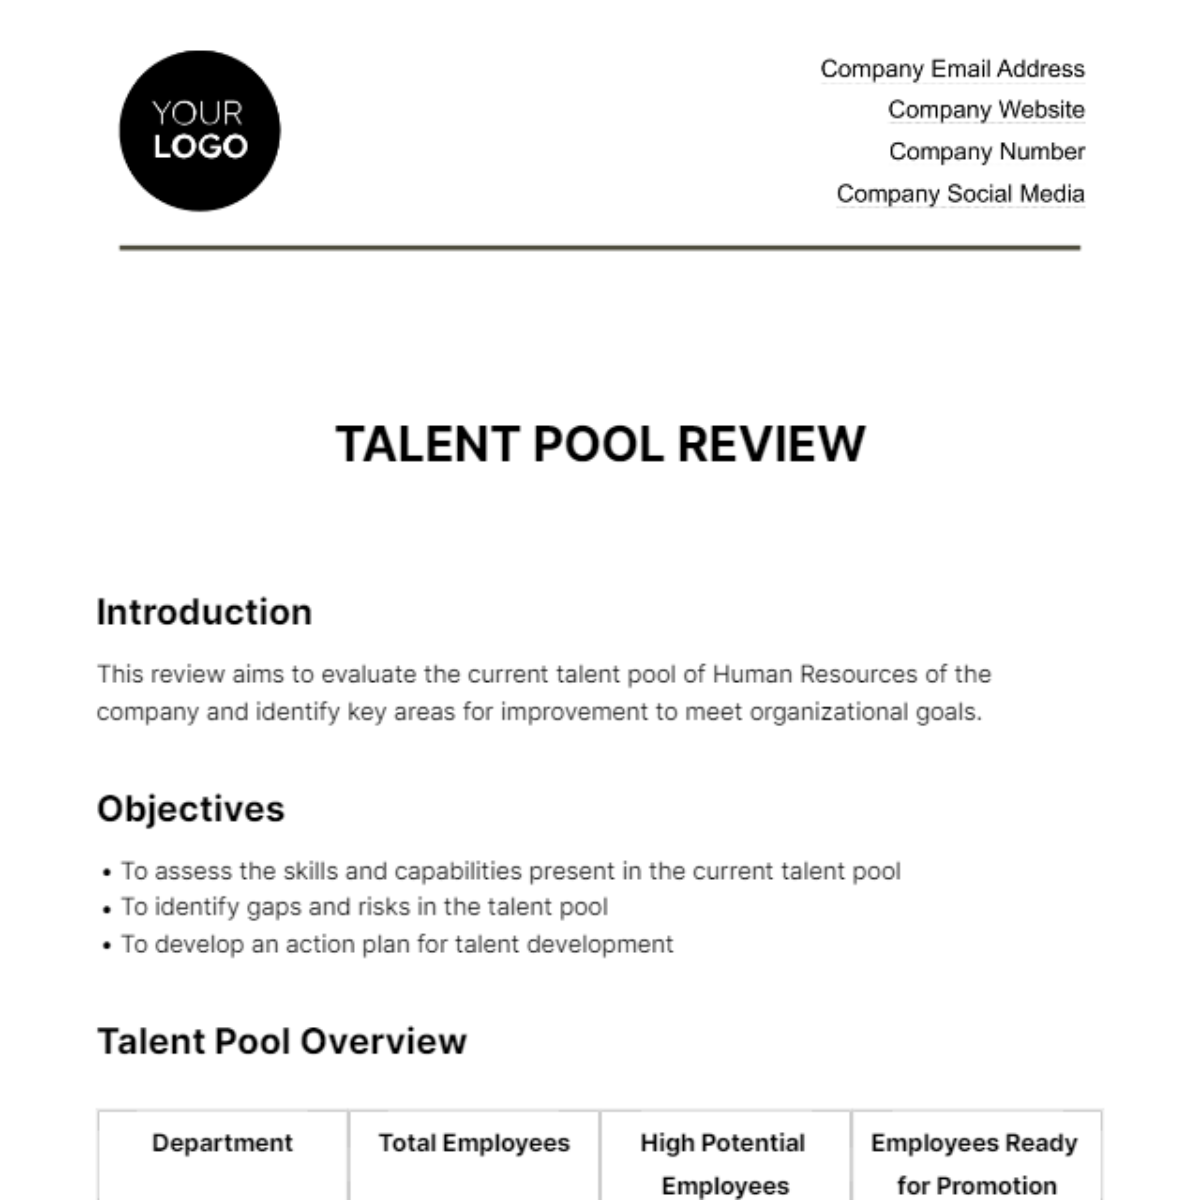 Talent Pool Review HR Template